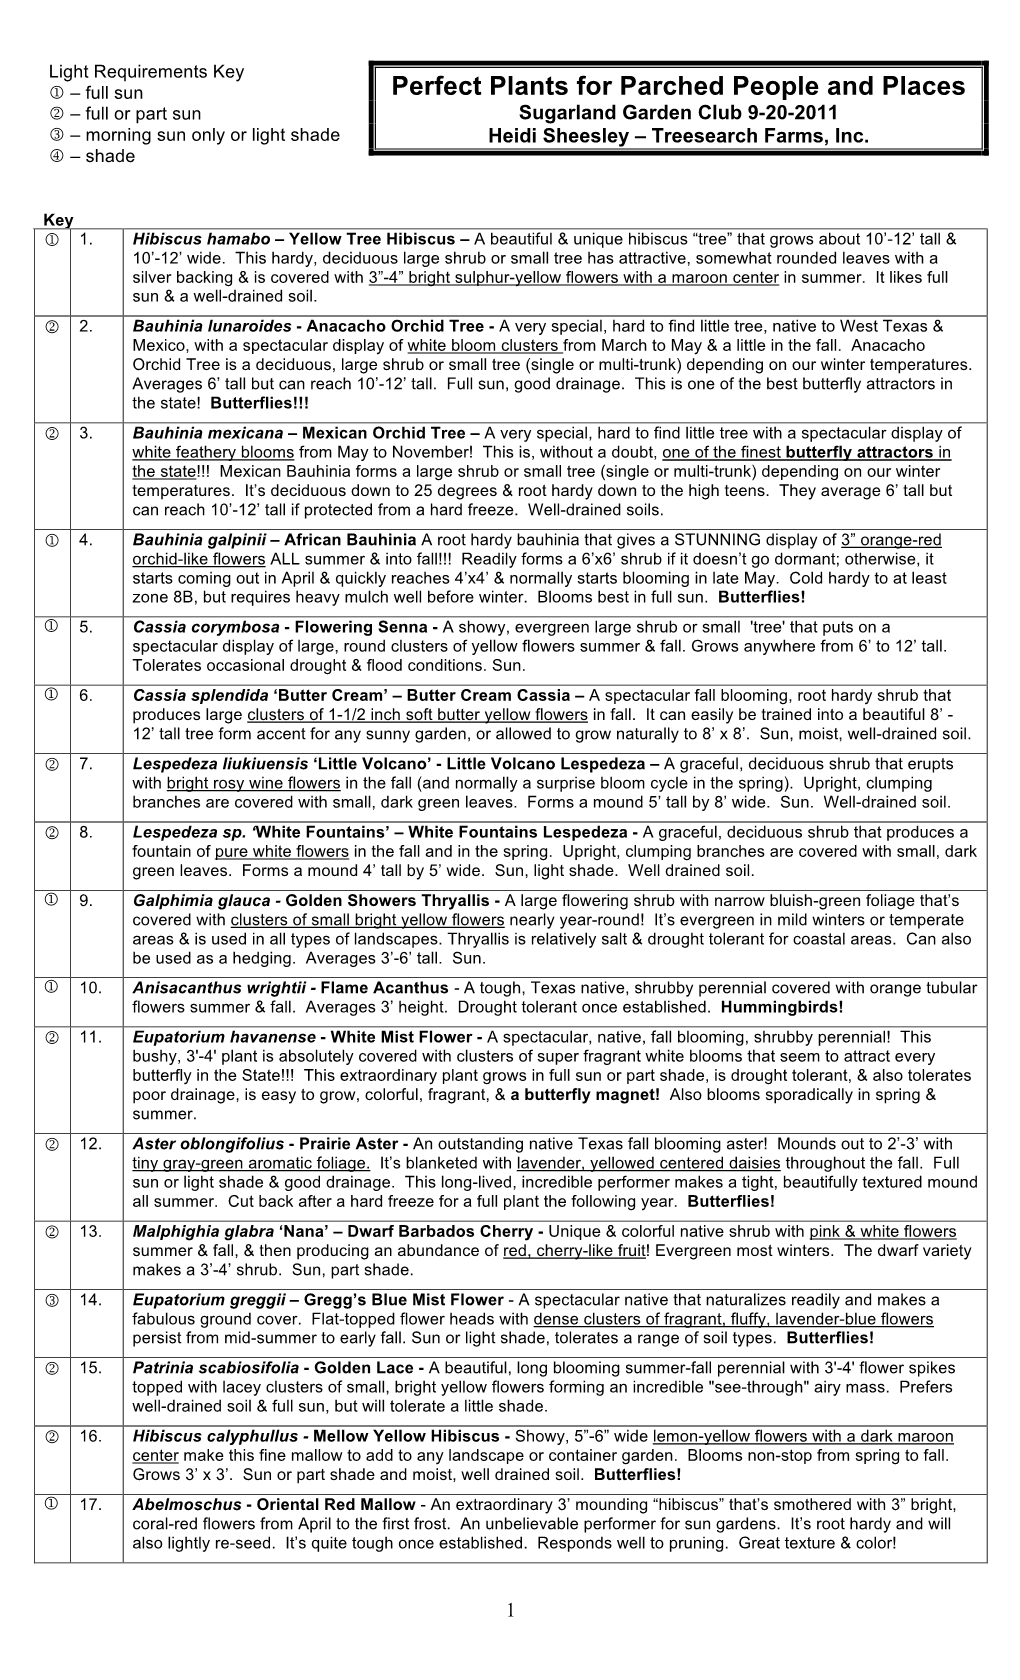 Sugarland Handout 9-20-2011 Amended Legal